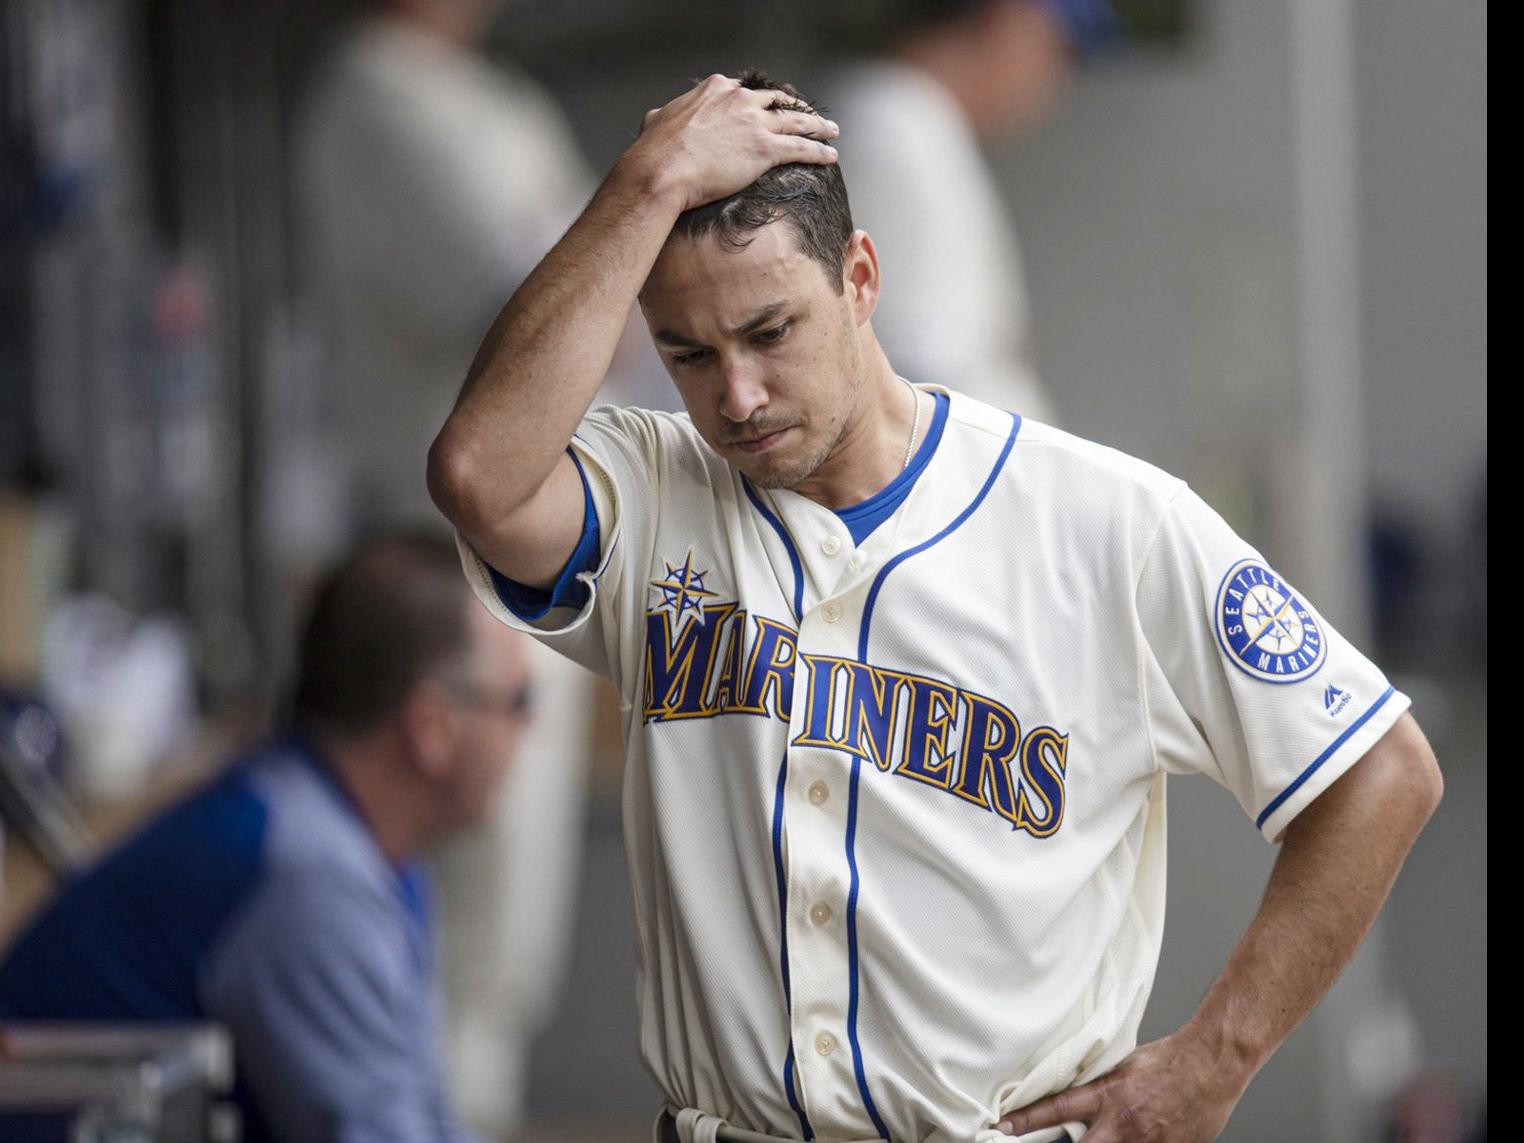 Marco Gonzales' struggles continue as Mariners swamped by Angels, Mariners